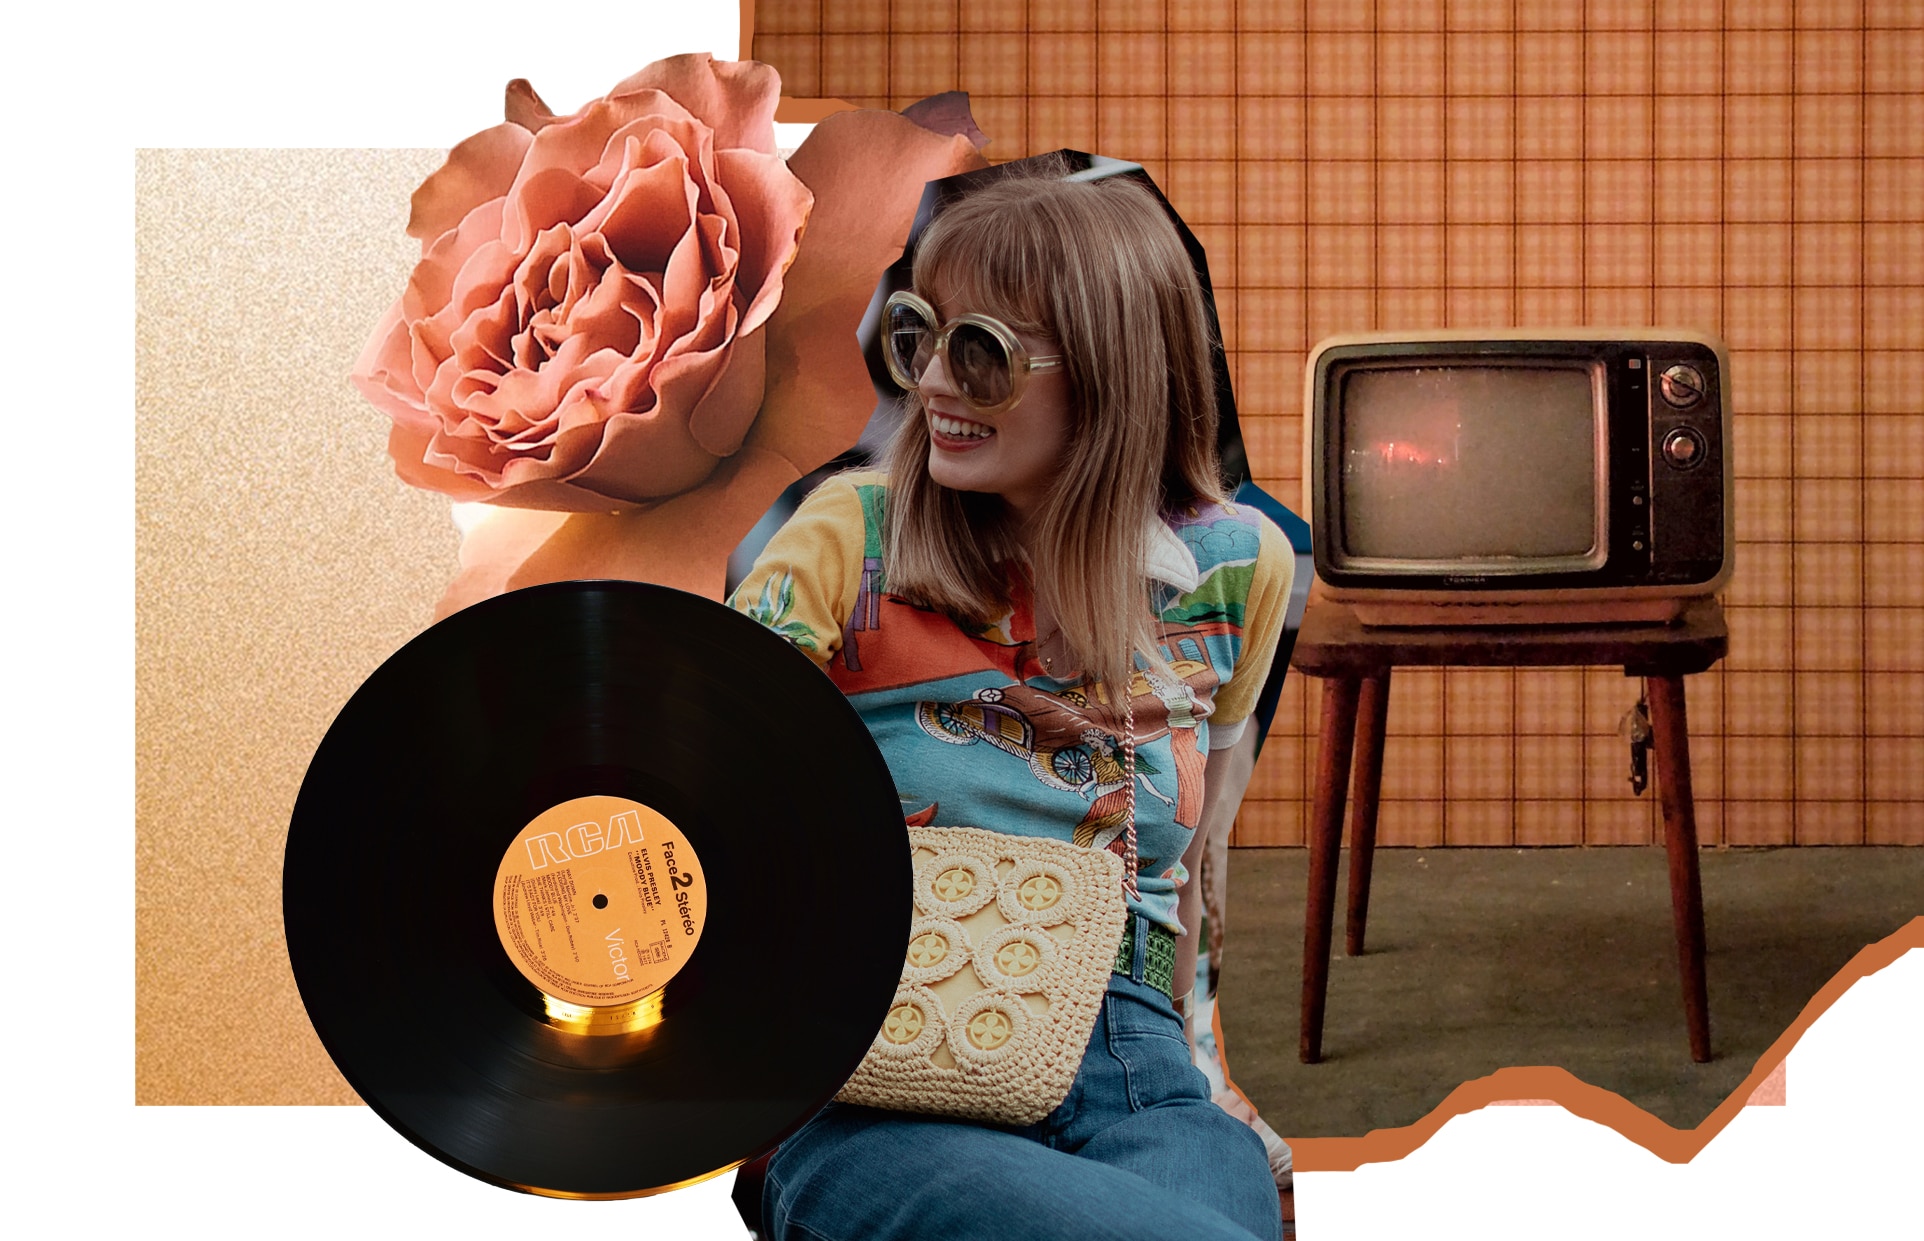 collage of decor trends 2023. white woman with bangs and 70s outfit sits in the middle, with a record, rose layered over her. background with 70s print wallpaper and old school tv on table sit in back of image.